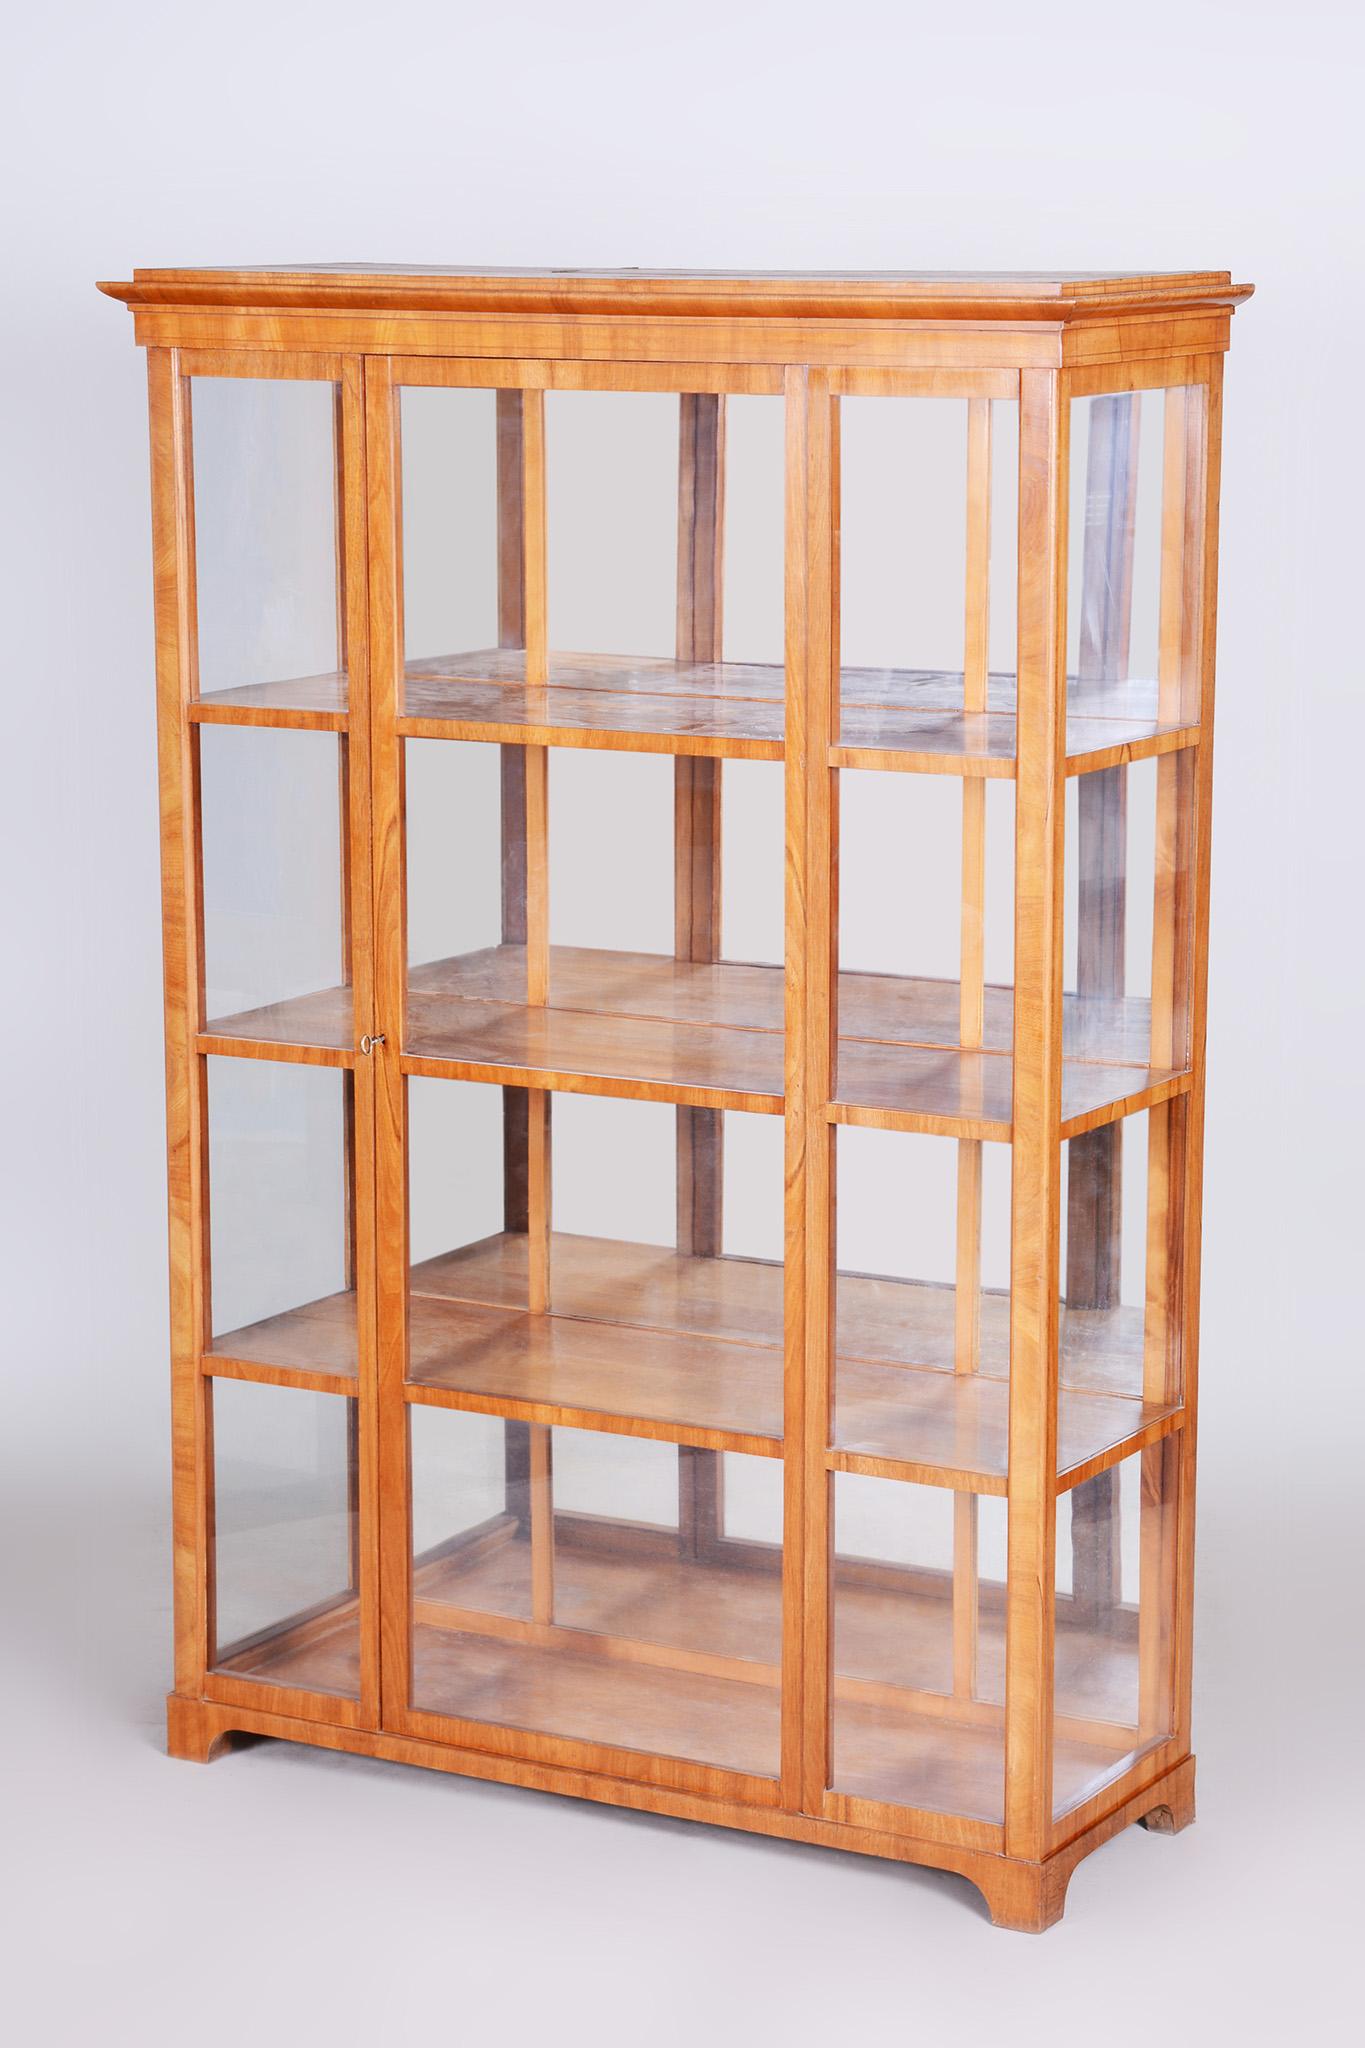 Shipping to any US port only for $290 USD

Completely restored Austrian Biedermeier glassed in display cabinet.
Source: Austria
Period: 1840-1849
Material: Walnut.